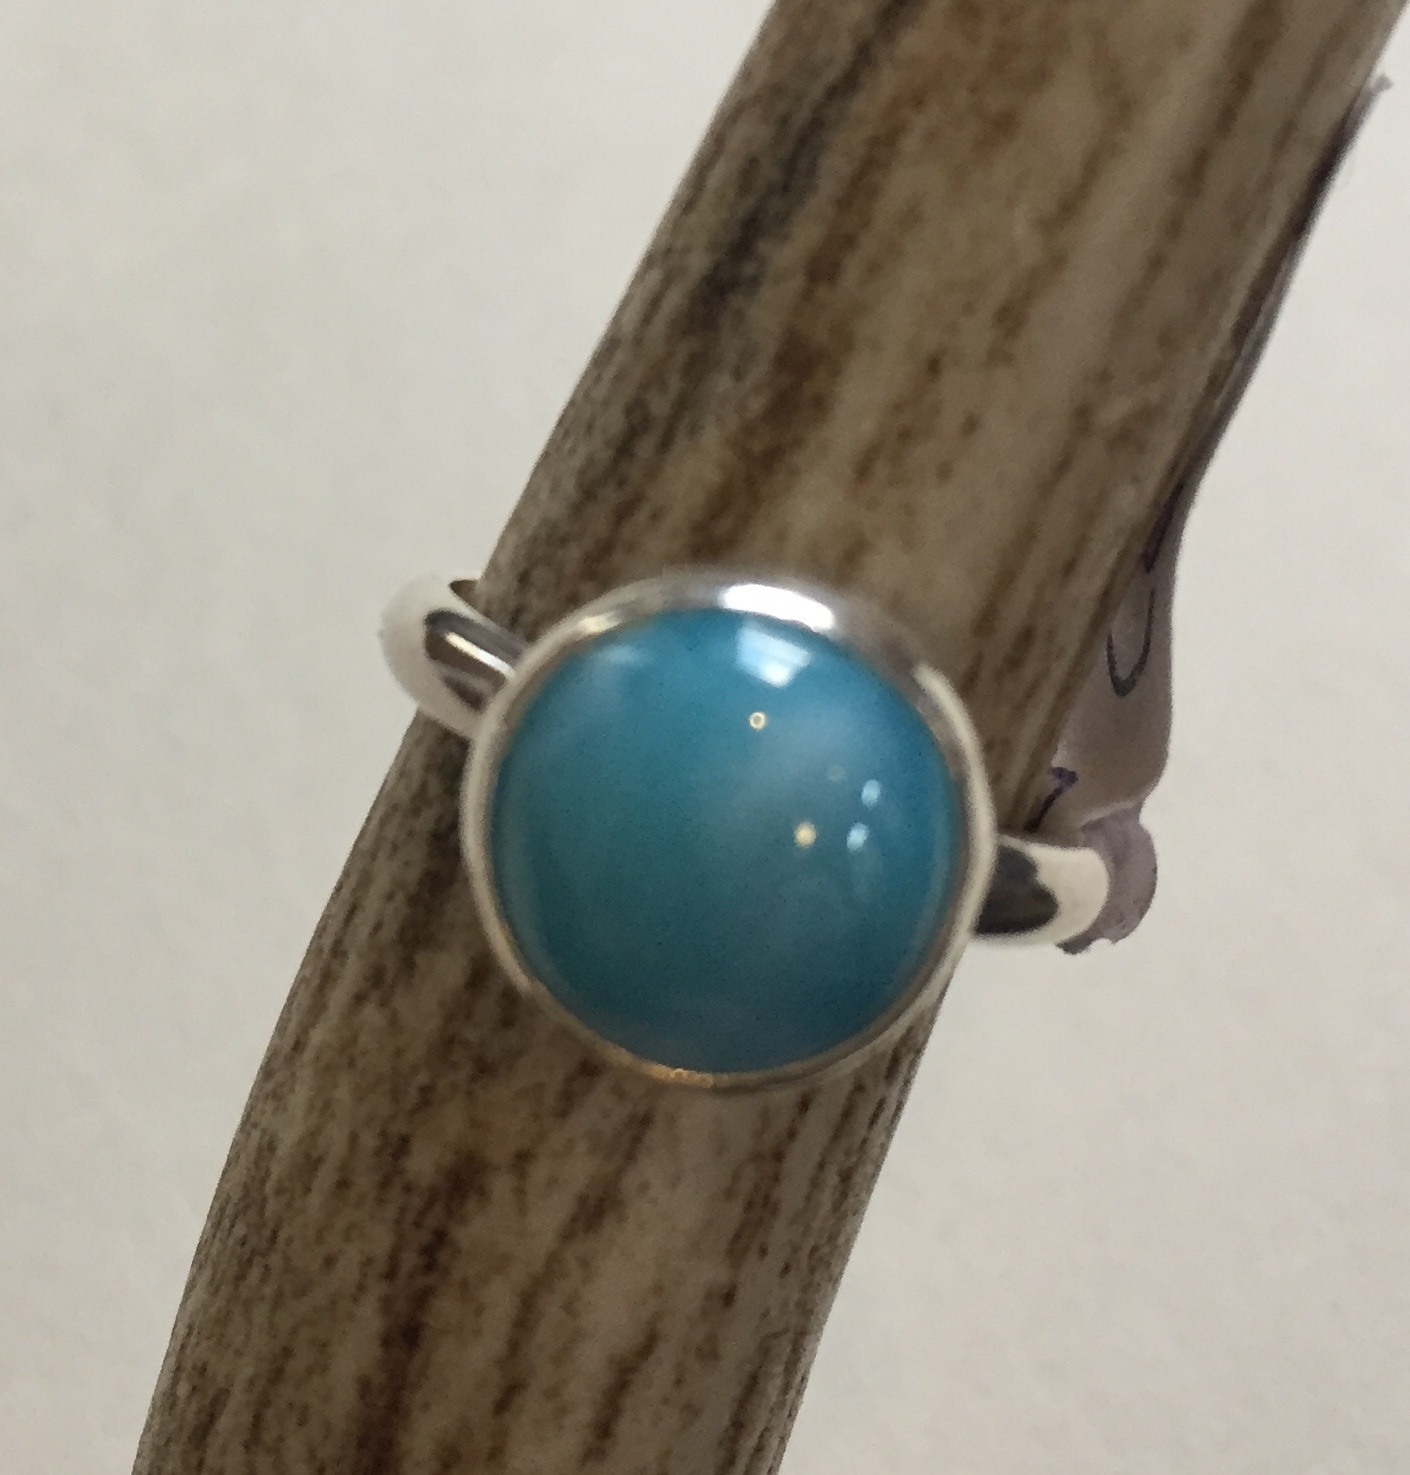 Round Turquoise Ring MA37
Sterling Silver
$40.